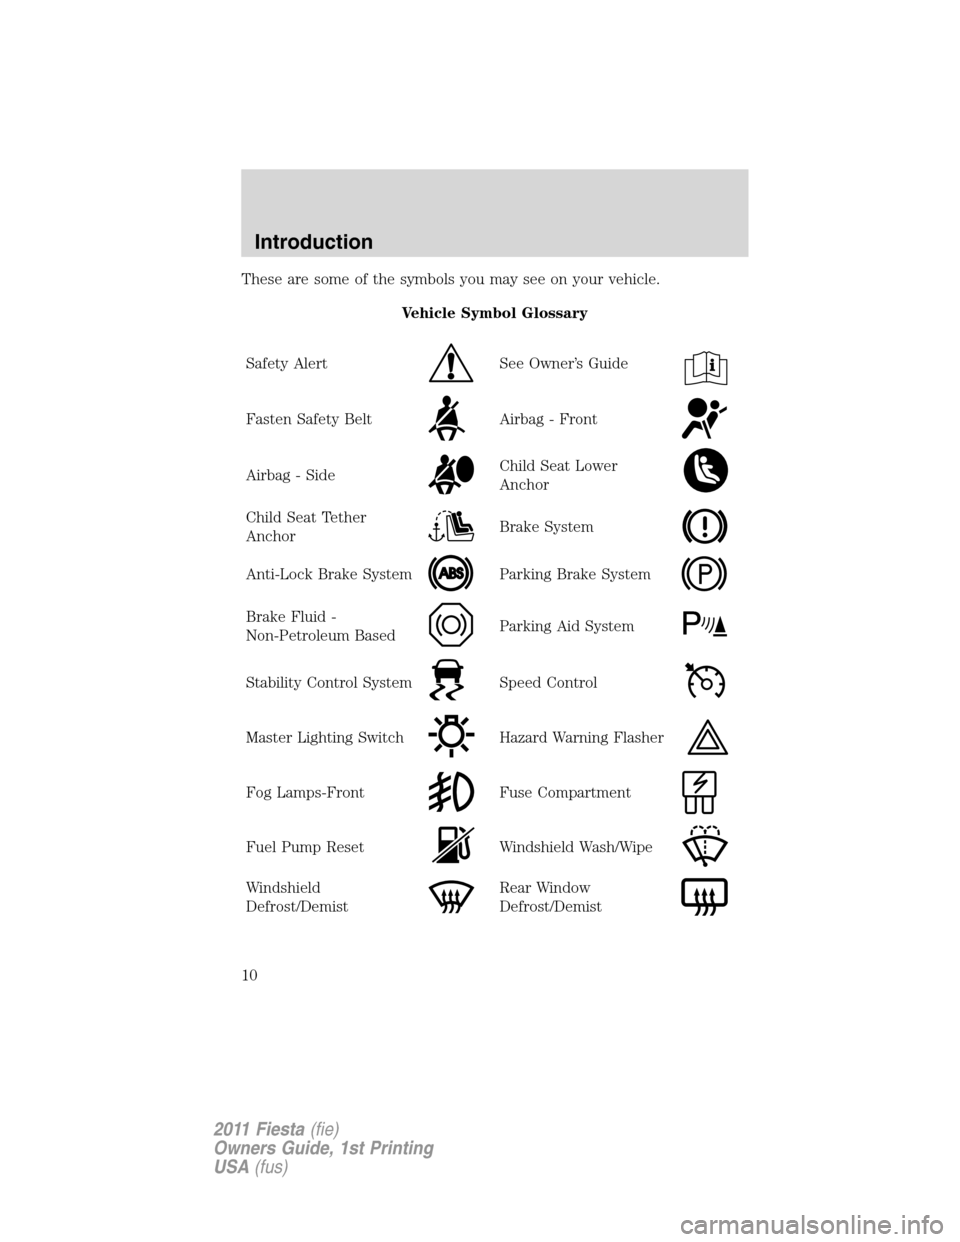 FORD FIESTA 2011 6.G Owners Manual These are some of the symbols you may see on your vehicle.
Vehicle Symbol Glossary
Safety Alert
See Owner’s Guide
Fasten Safety BeltAirbag - Front
Airbag - SideChild Seat Lower
Anchor
Child Seat Tet